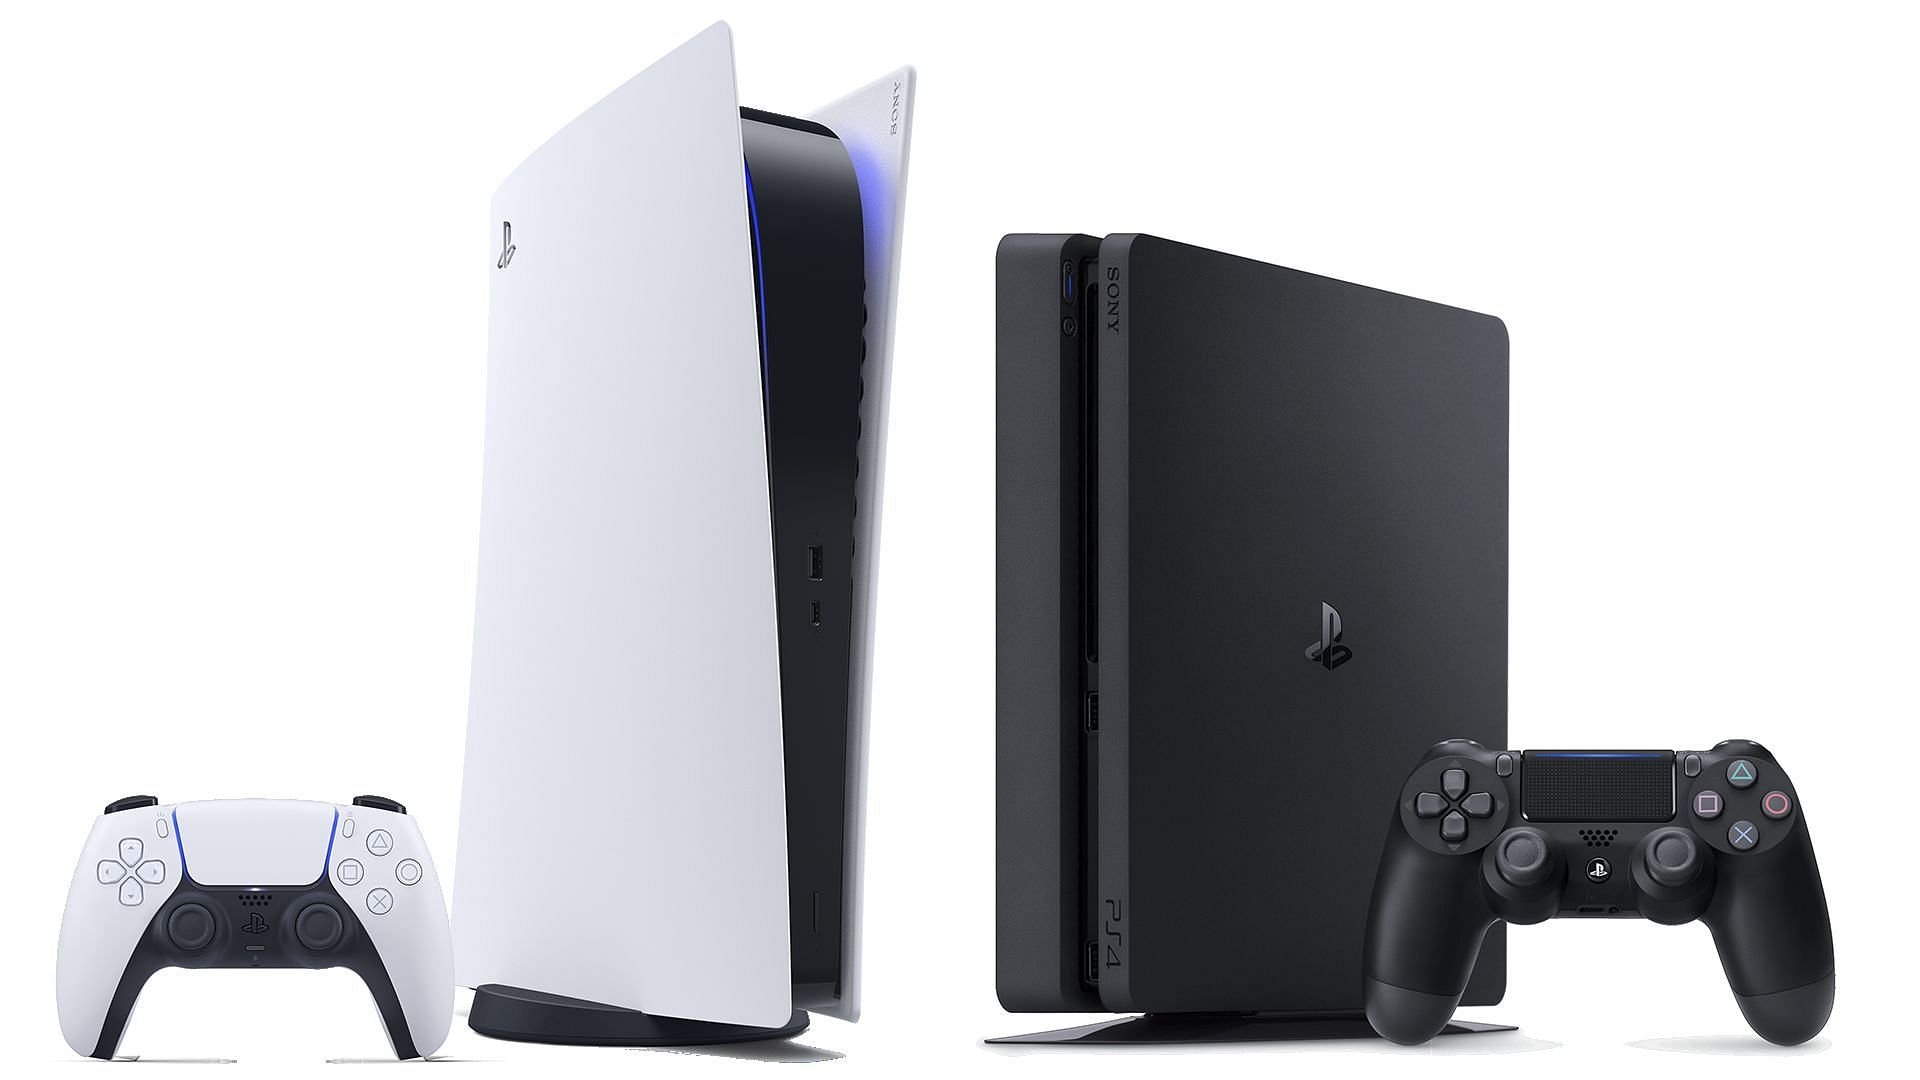 The PlayStation 5 Digital Edition and the PS4 Slim (Image via Sony)